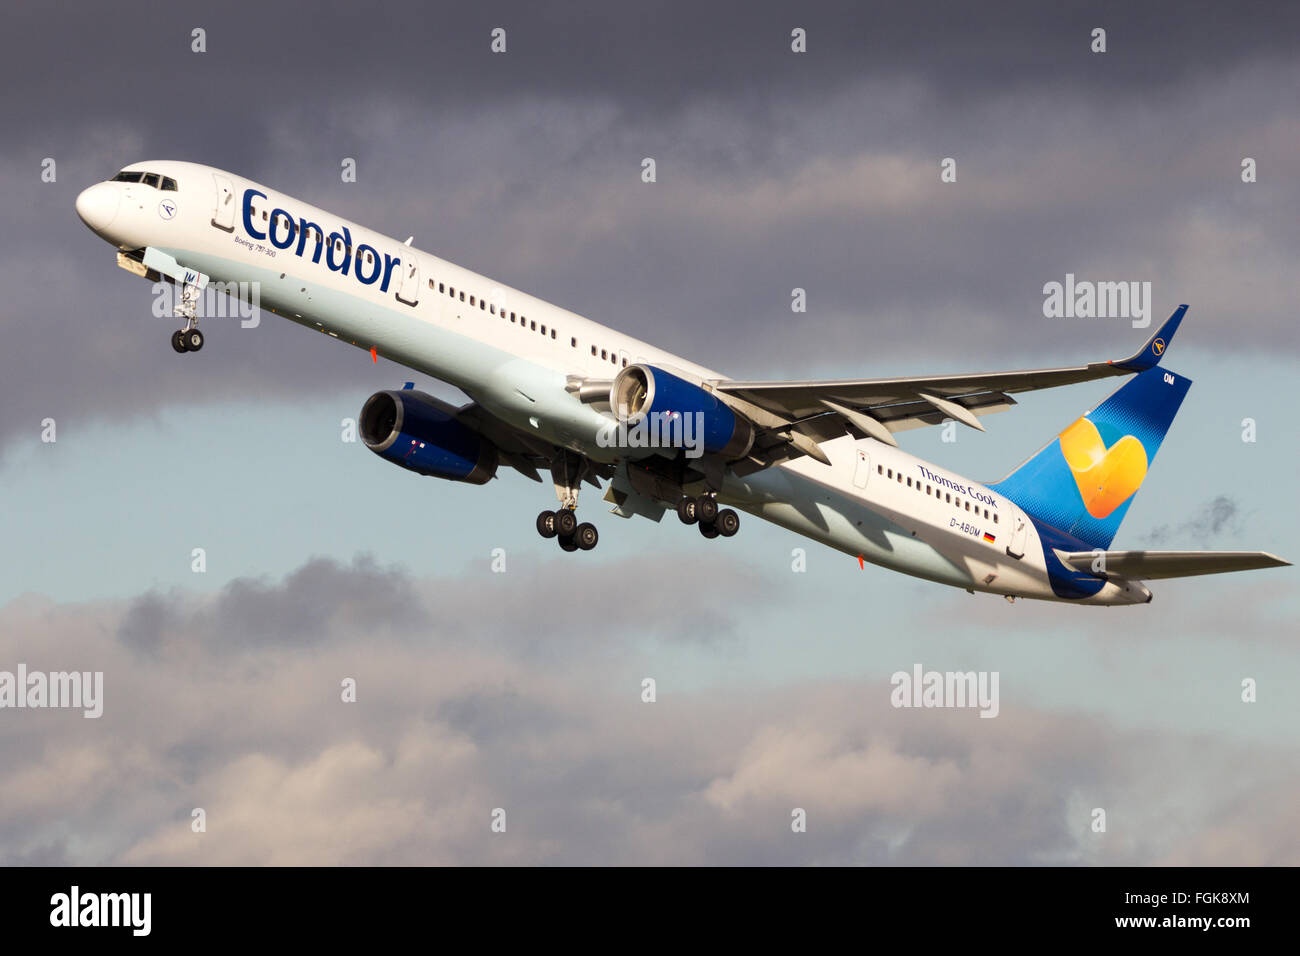 Condor Flugdienst (Thomas Cook) Boeing 757 take-off from Dusseldorf Airport. Stock Photo